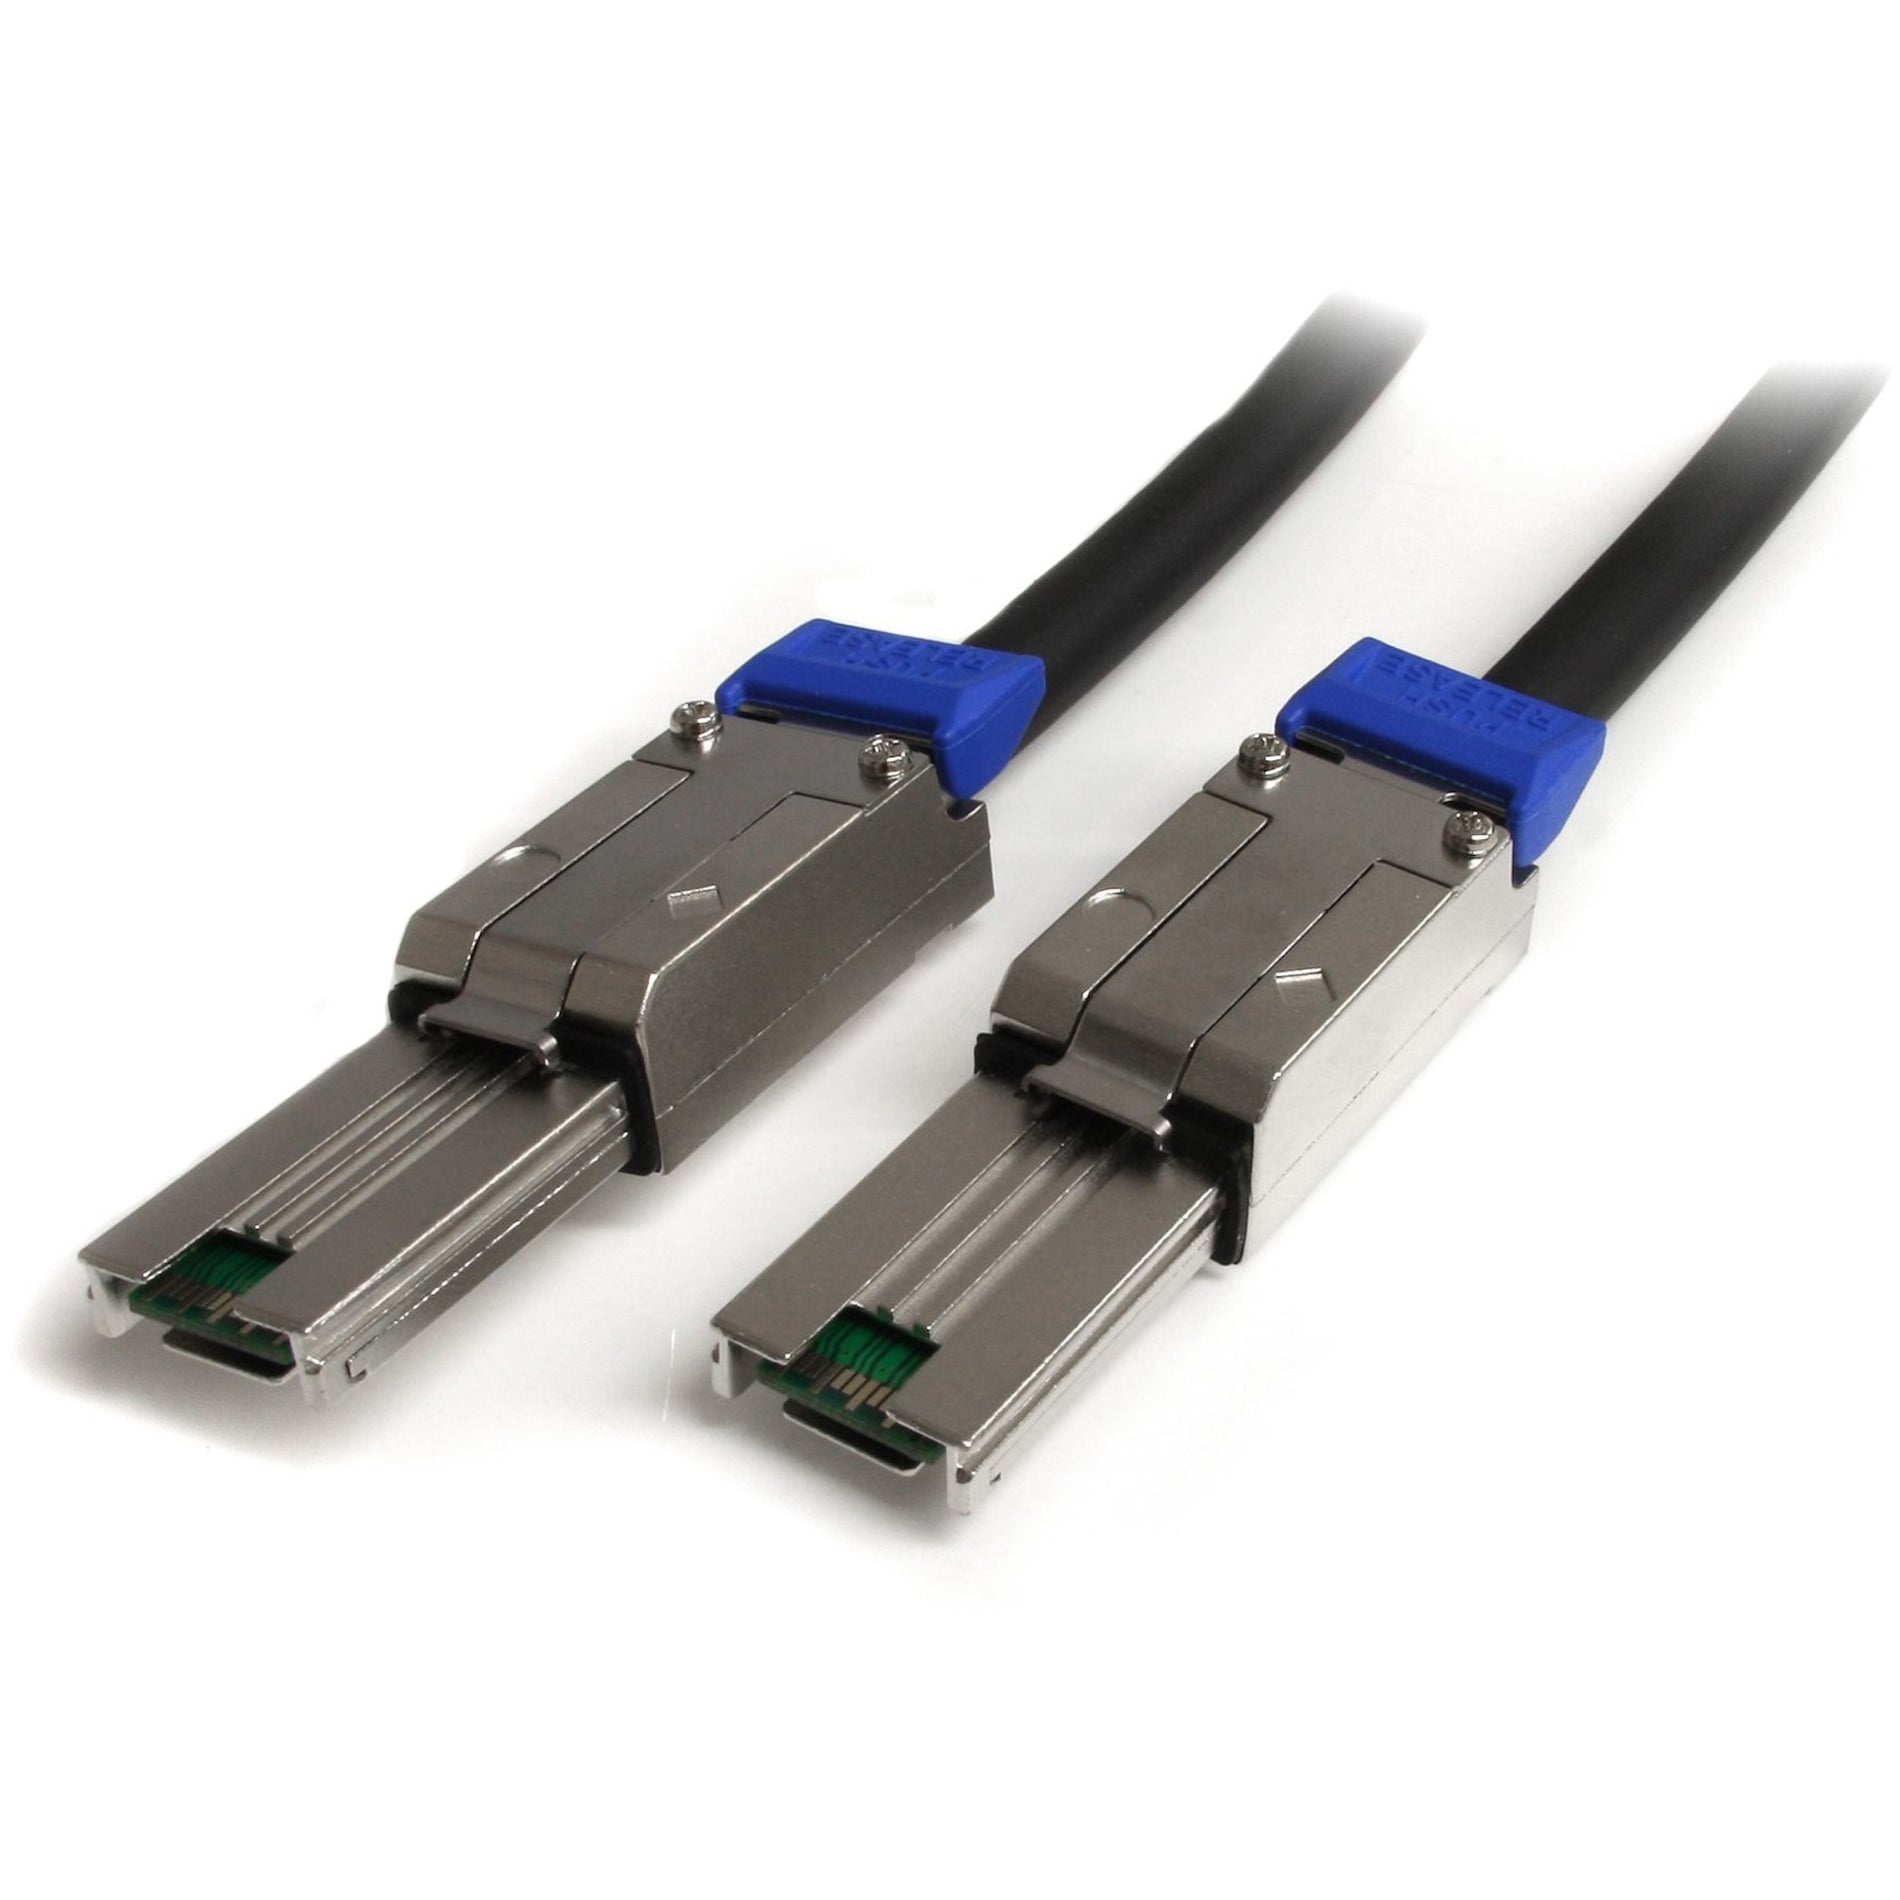 StarTech.com ISAS88883 3m External Mini SAS Cable - Serial Attached SCSI SFF-8088 to SFF-8088, Latching Connector, 6 Gbit/s Data Transfer Rate